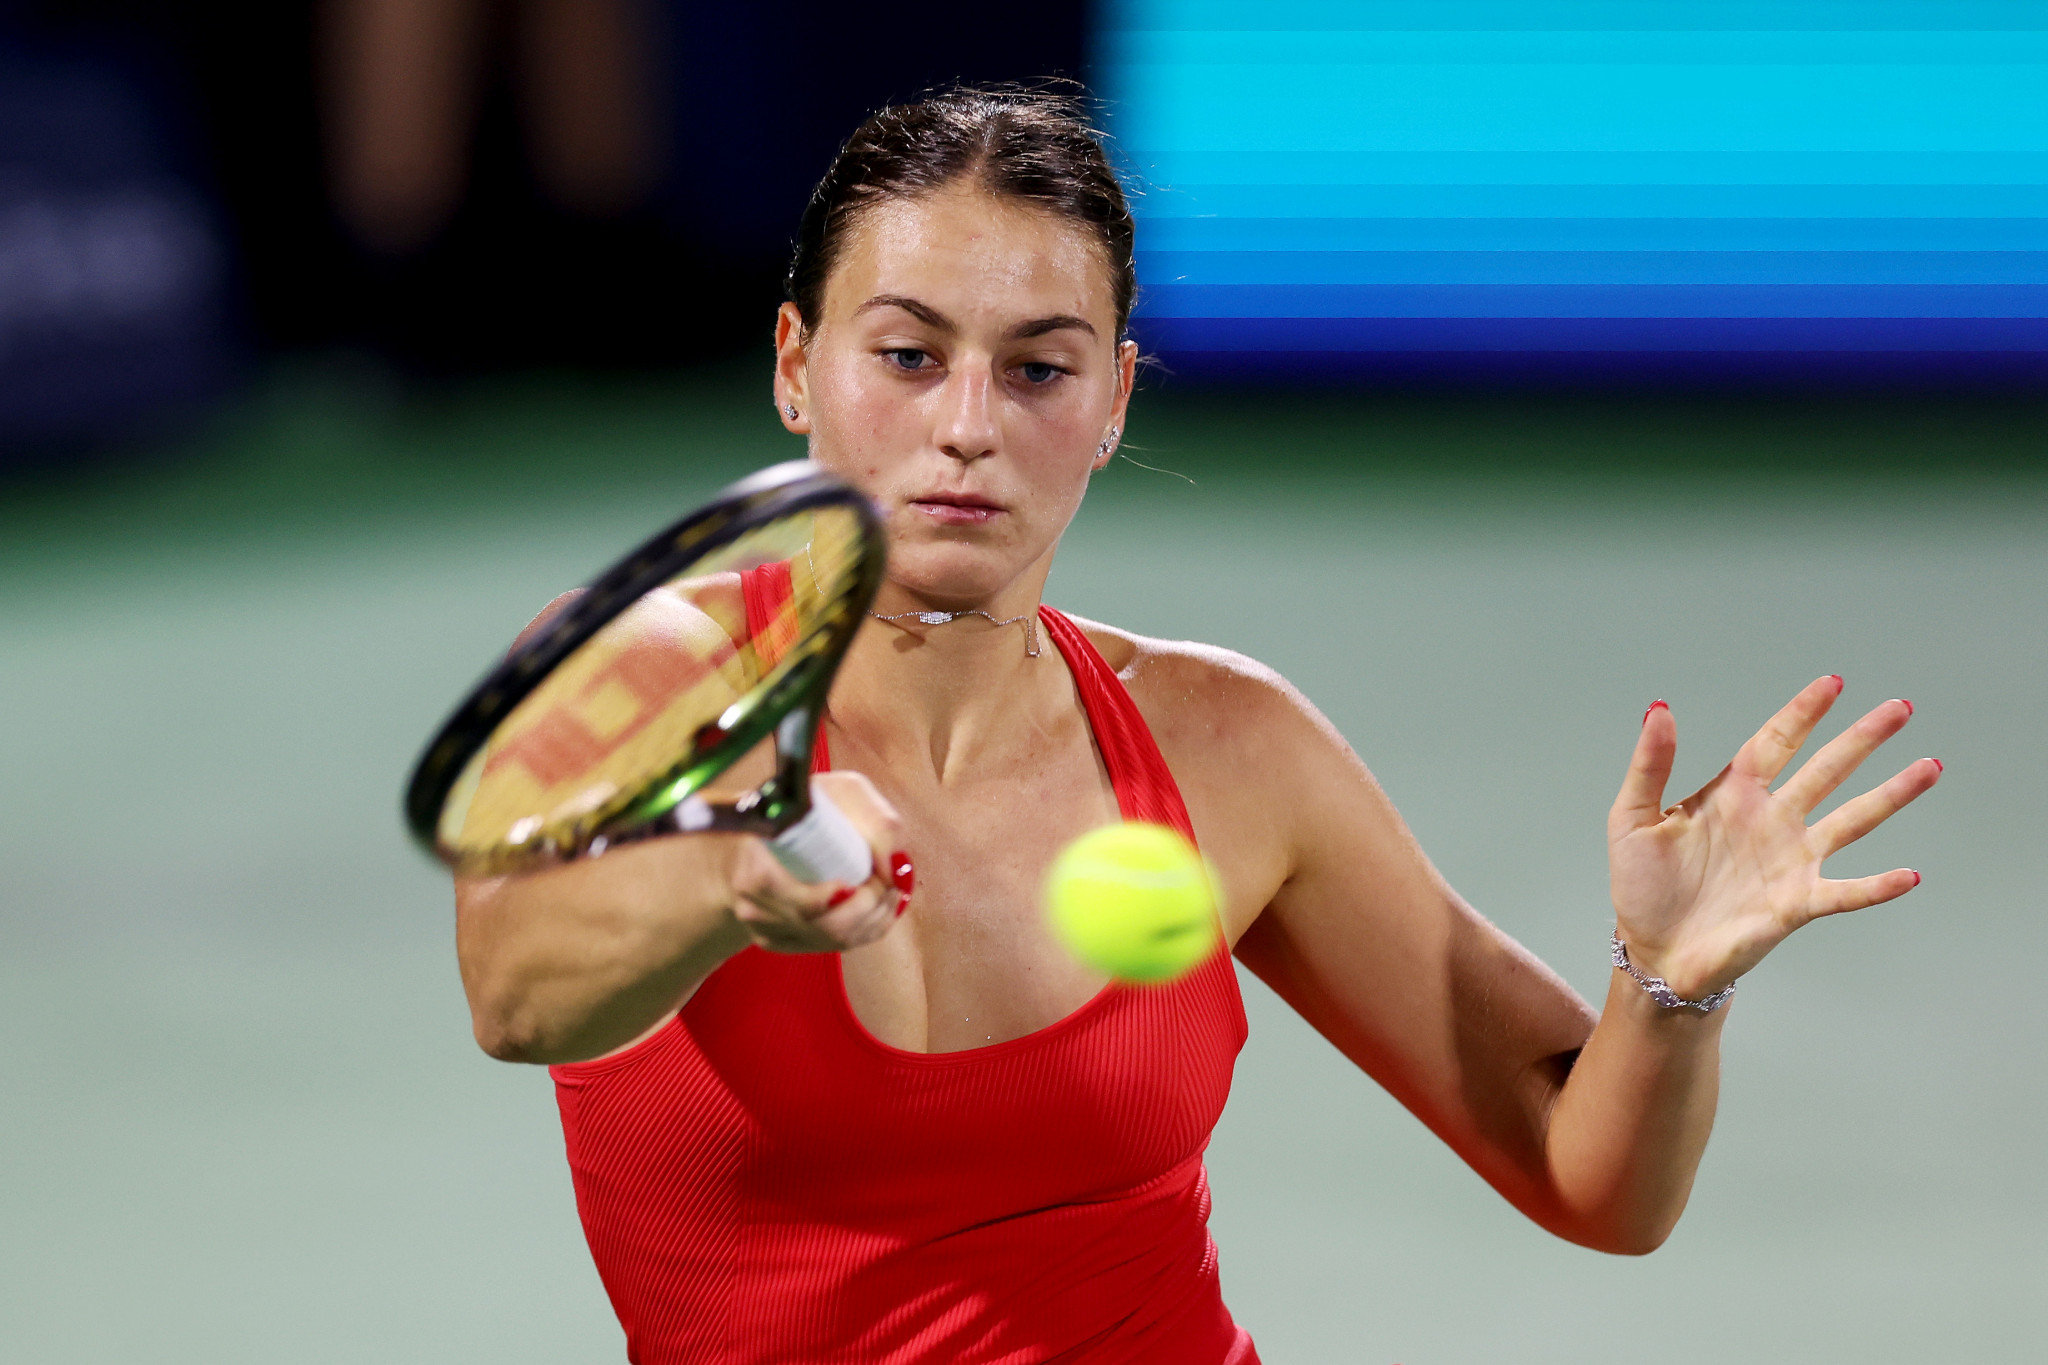 Kostyuk dedicated her win to the people of Ukraine who are suffering from the war against Russia ©Getty Images